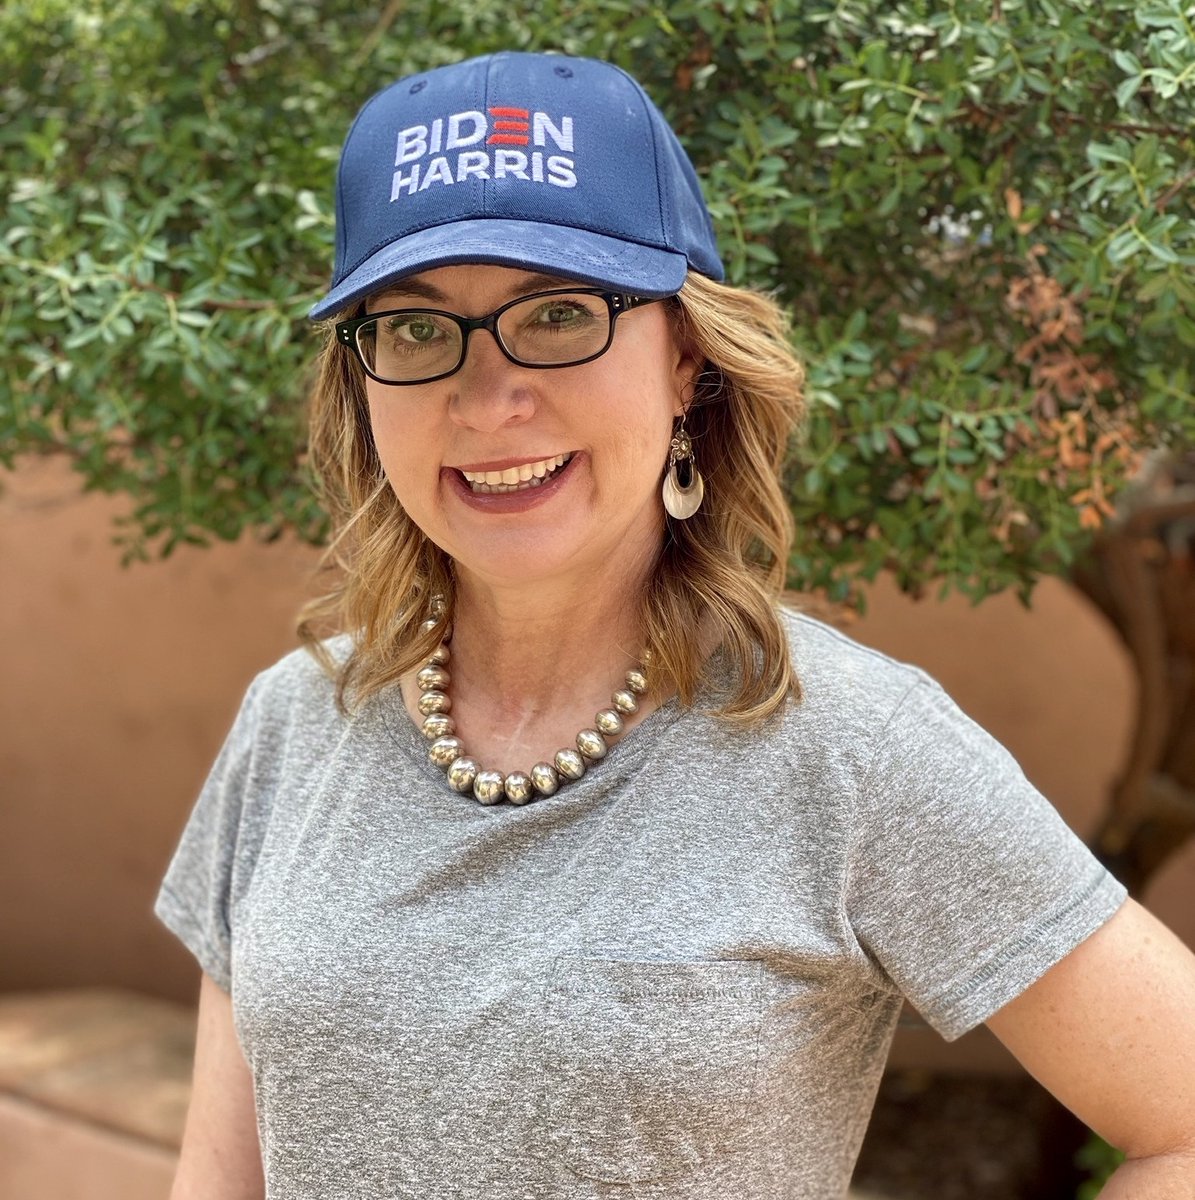 Gabrielle Giffords On Twitter This Week Joebiden And Kamalaharris Reminded Us What Compassionate Strong Leadership Looks Like I M Voting For Joe And Kamala Because They Ve Spent Their Careers Fighting To Stop Gun